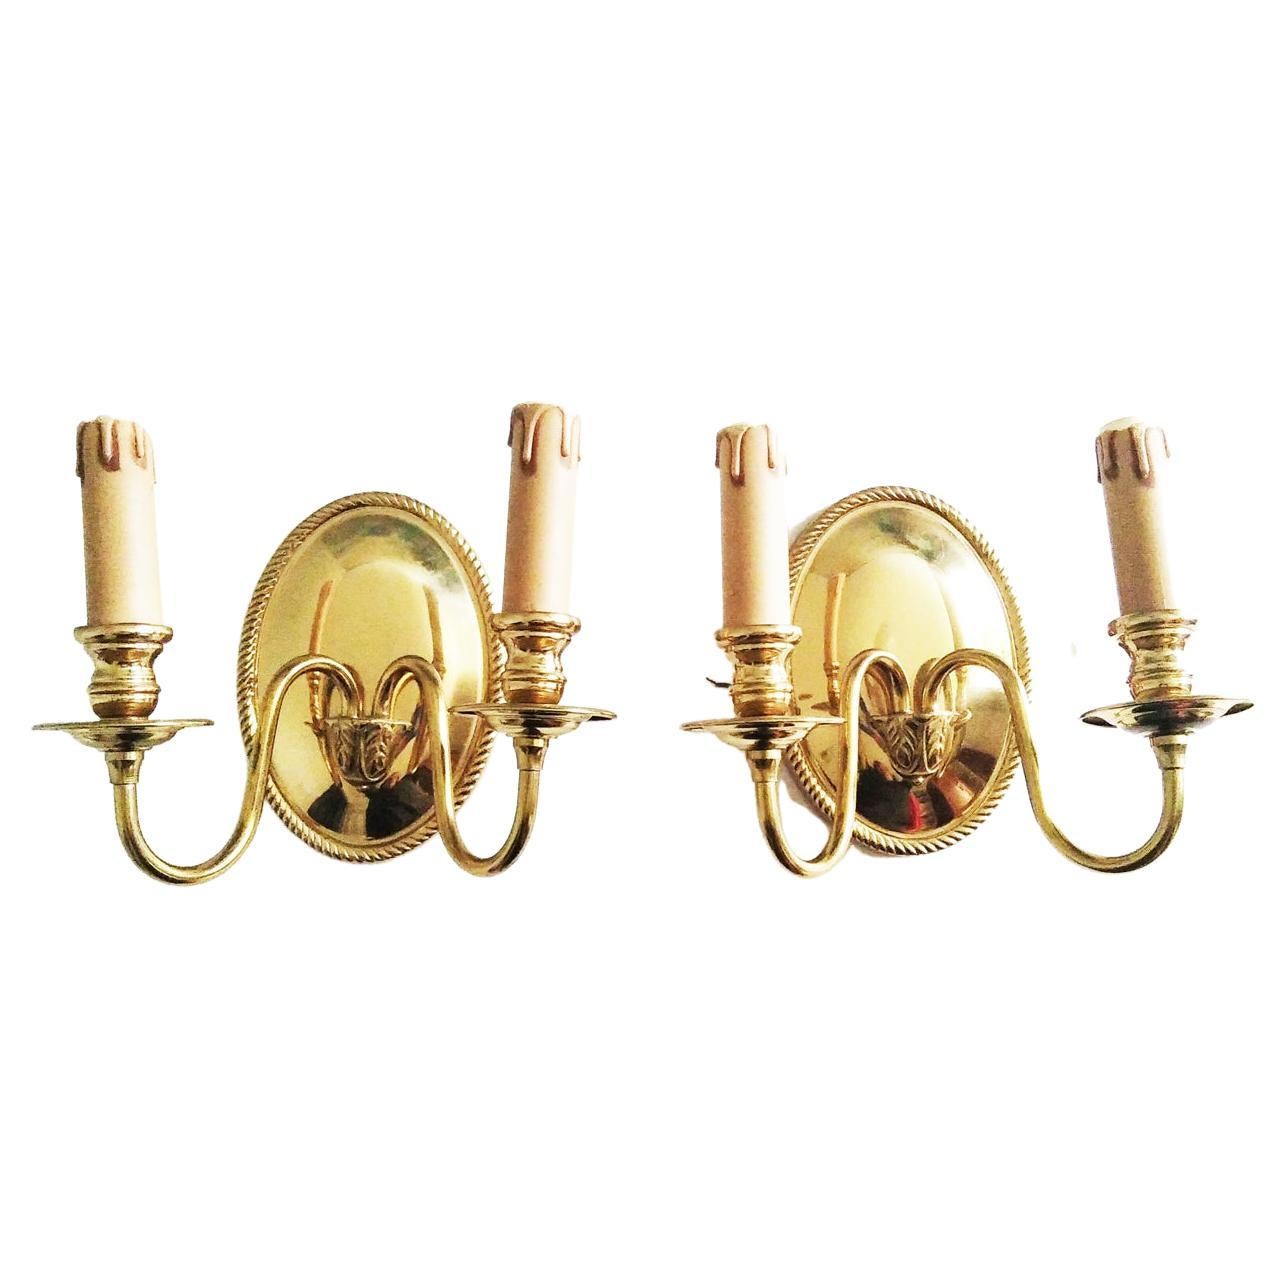 *The price is for one piece
 They are sold separately, but I prefer them to be sold together

Pair of brass wall sconces 
They are in excellent condition, like new.